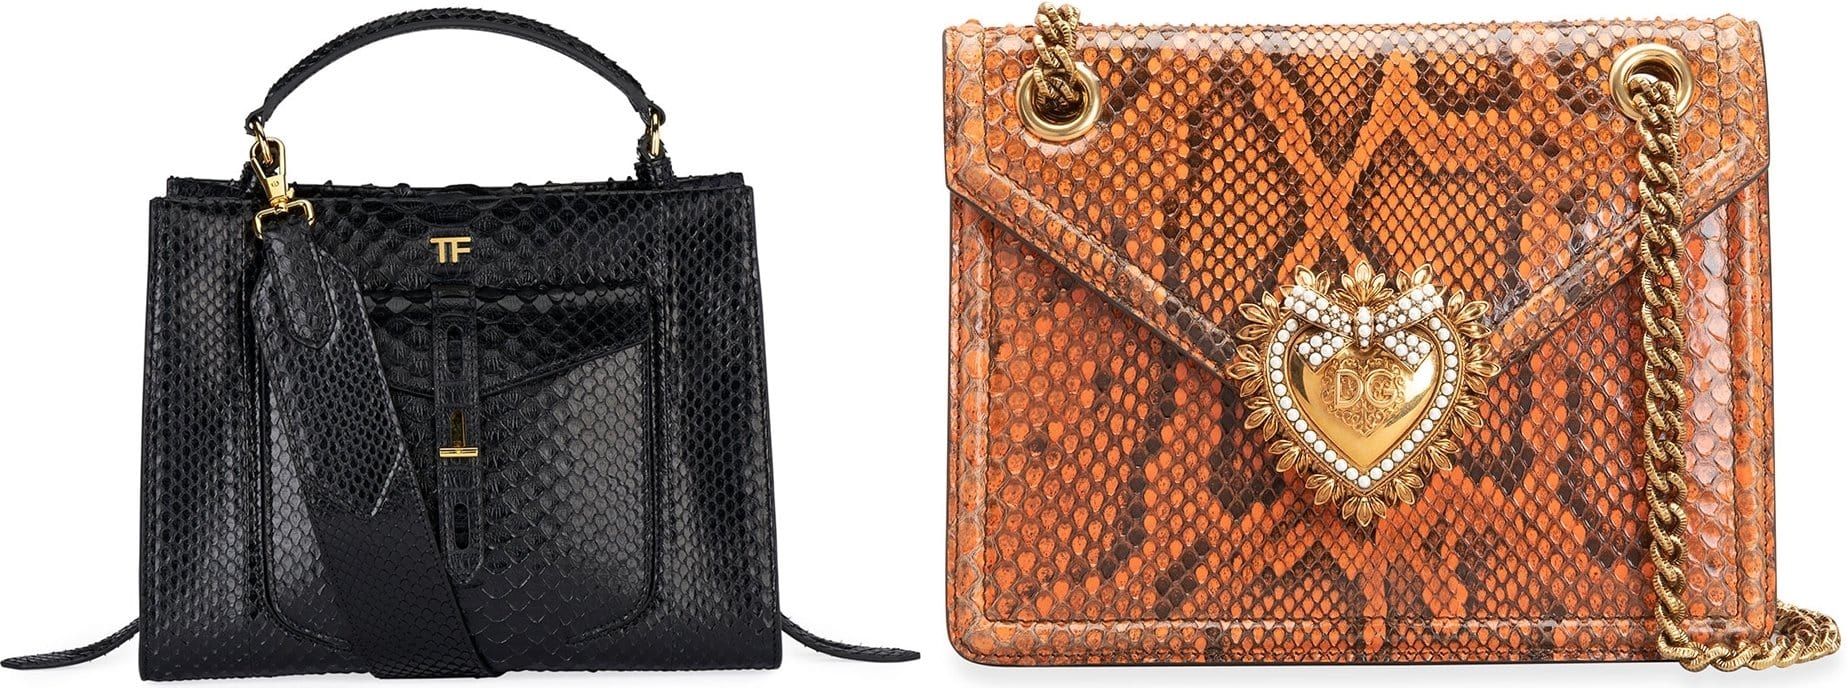 Tom Ford top-handle bag in genuine python snakeskin (L) and Dolce & Gabbana python crossbody bag with leather trim (R)